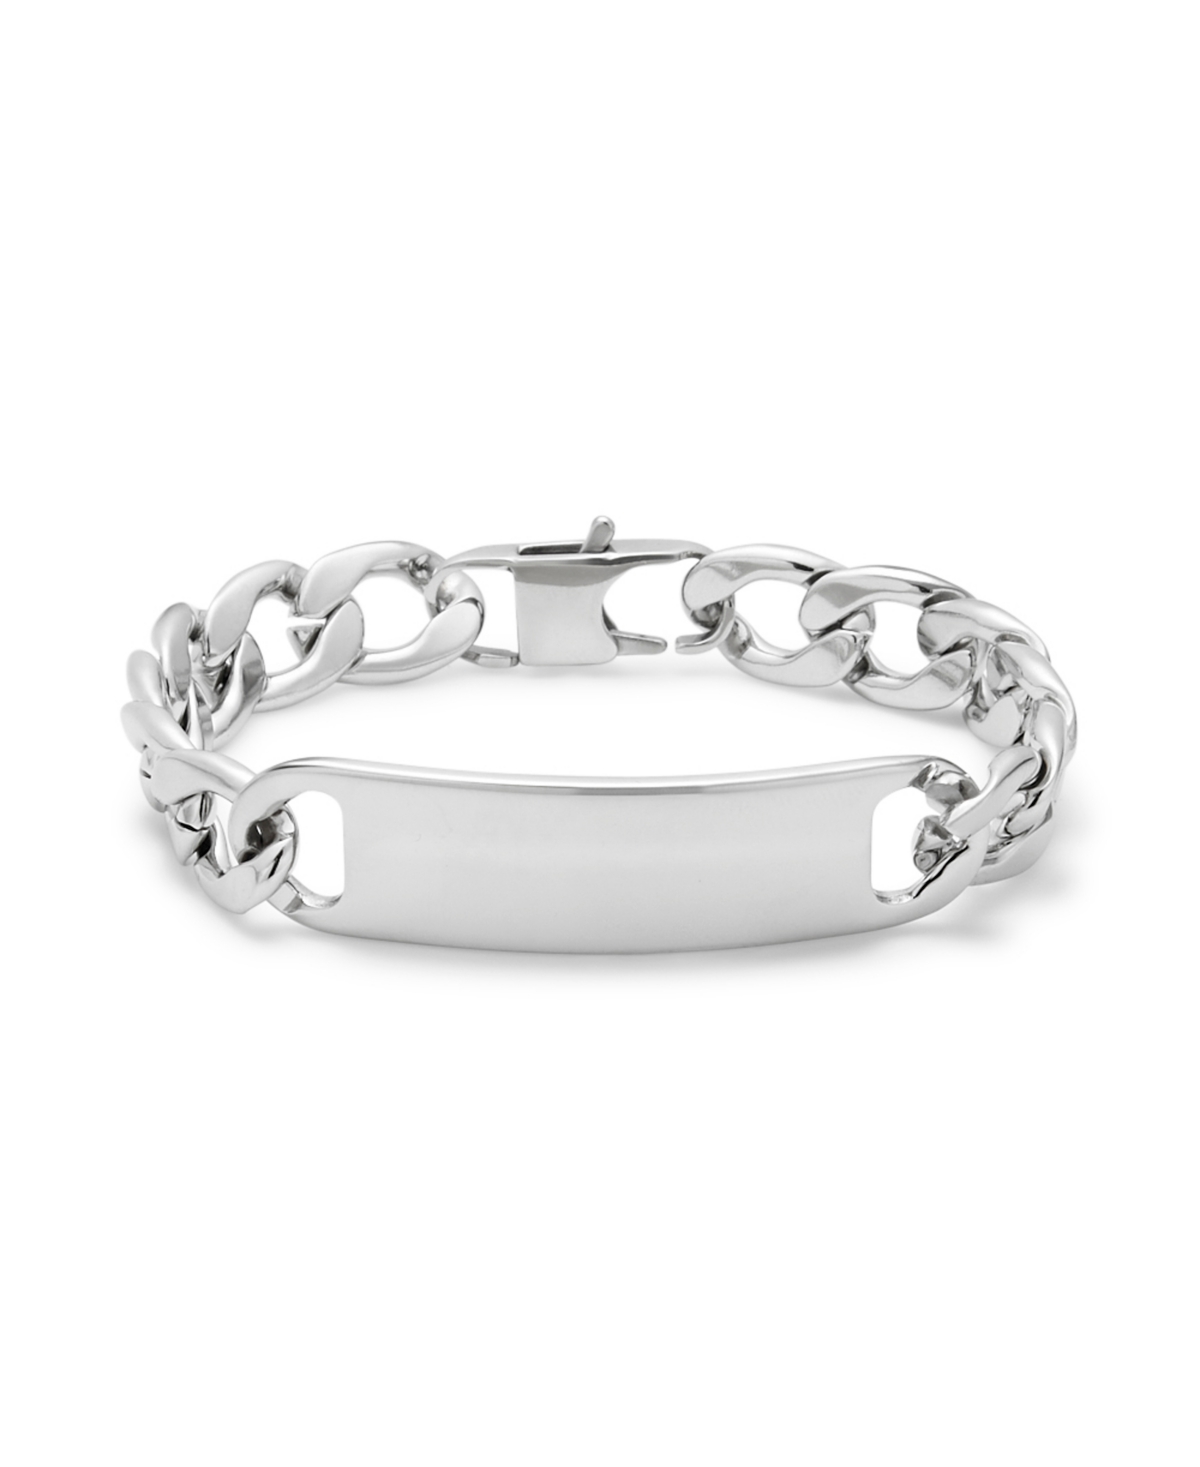 Eve's Jewelry Men's Stainless Steel Curb Link Id Bracelet